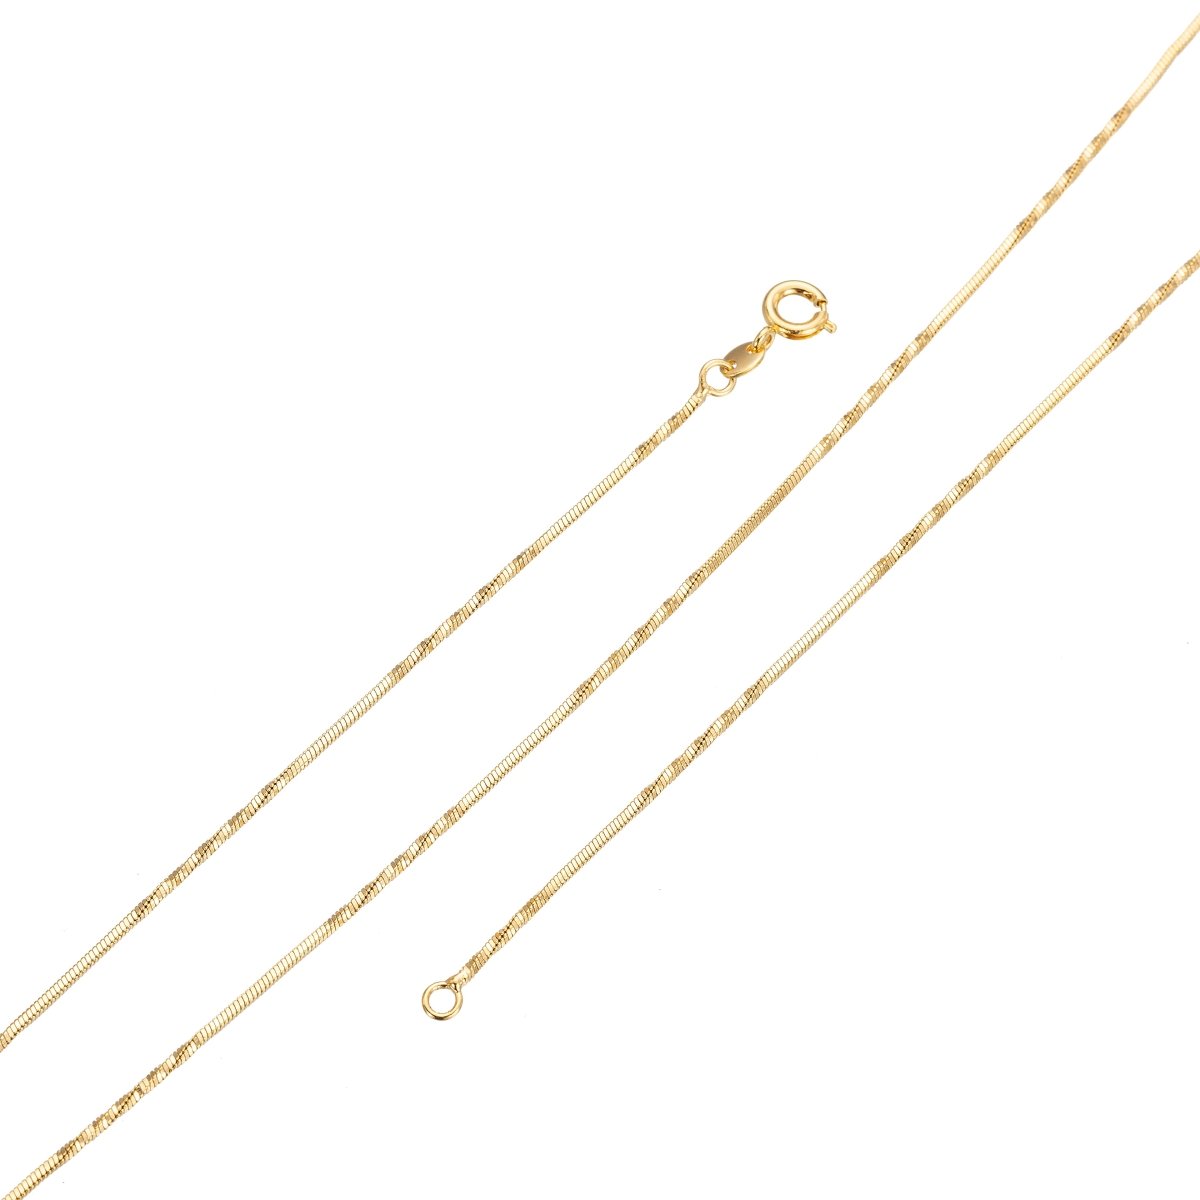 24K Gold Plated Necklace - Twisted Cocoon Necklace - Dainty 1.4mm Gold Cocoon Chain - 18, 21 Inches Layering Necklace Ready To Wear w/ Spring Ring | CN-251 Clearance Pricing - DLUXCA